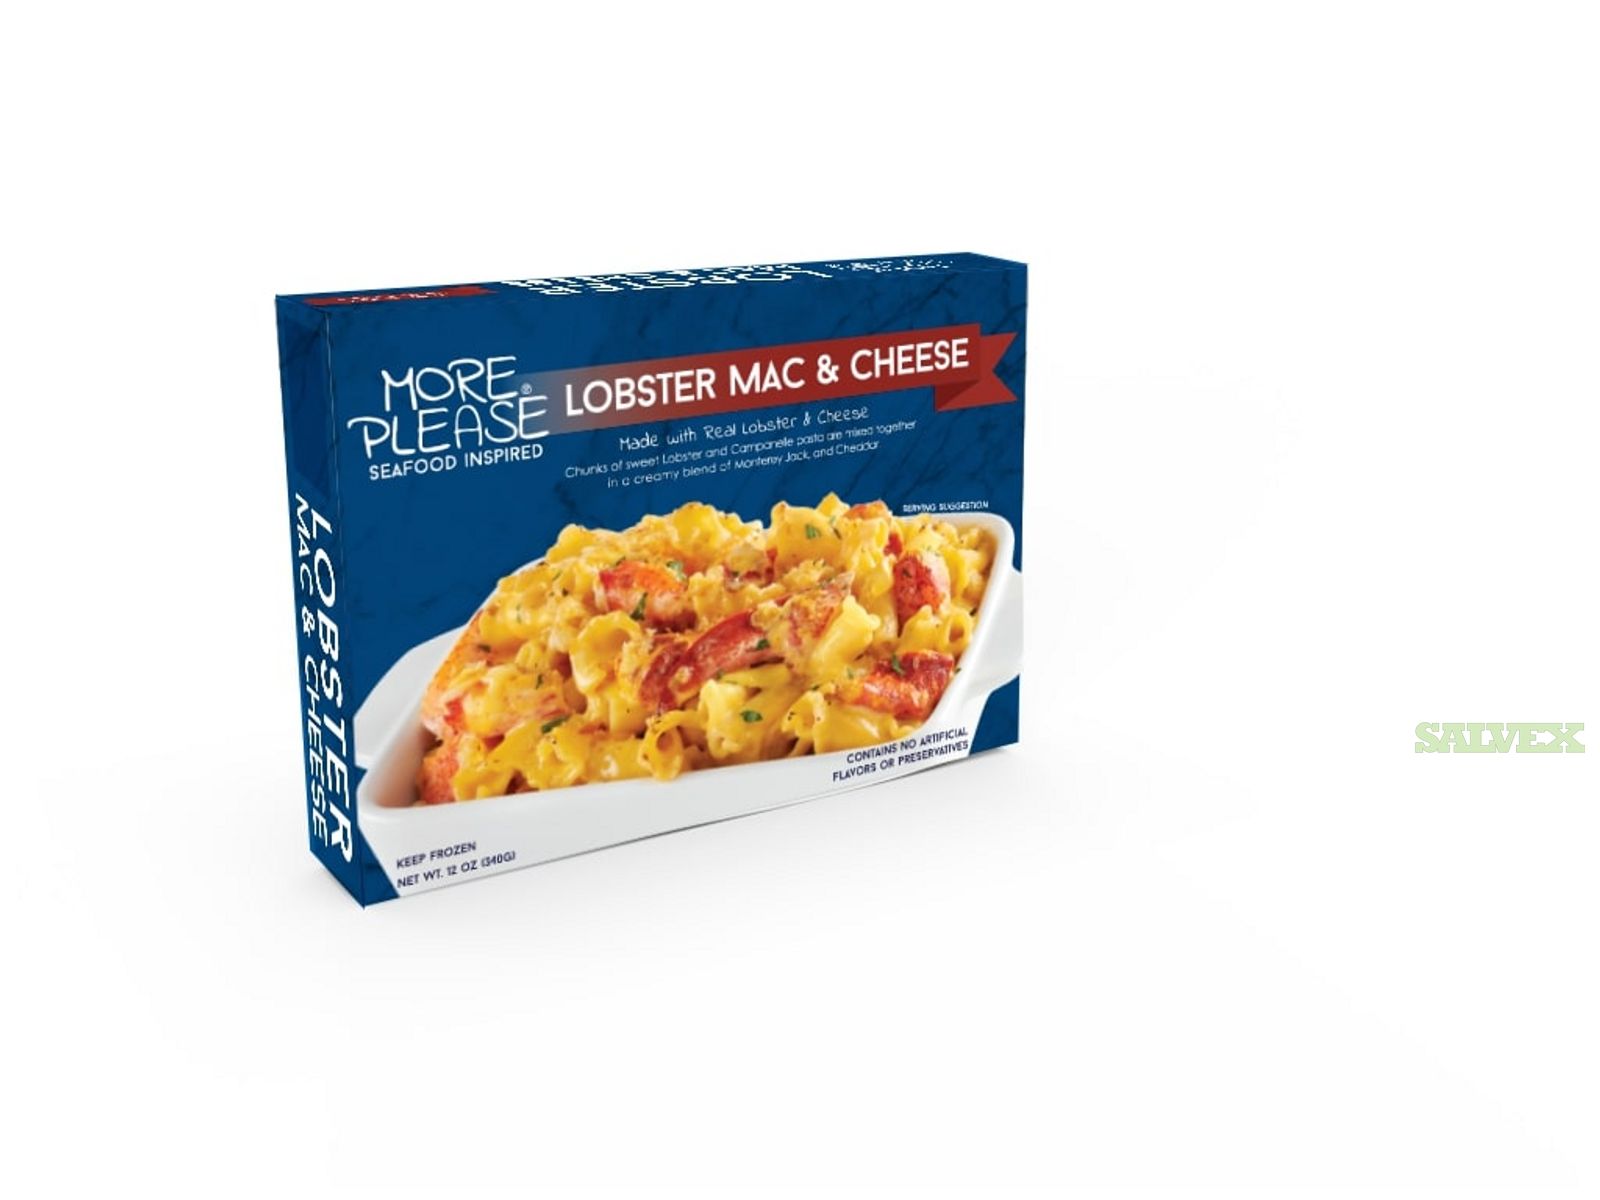 Lobster Mac & Cheese (43 Cases)